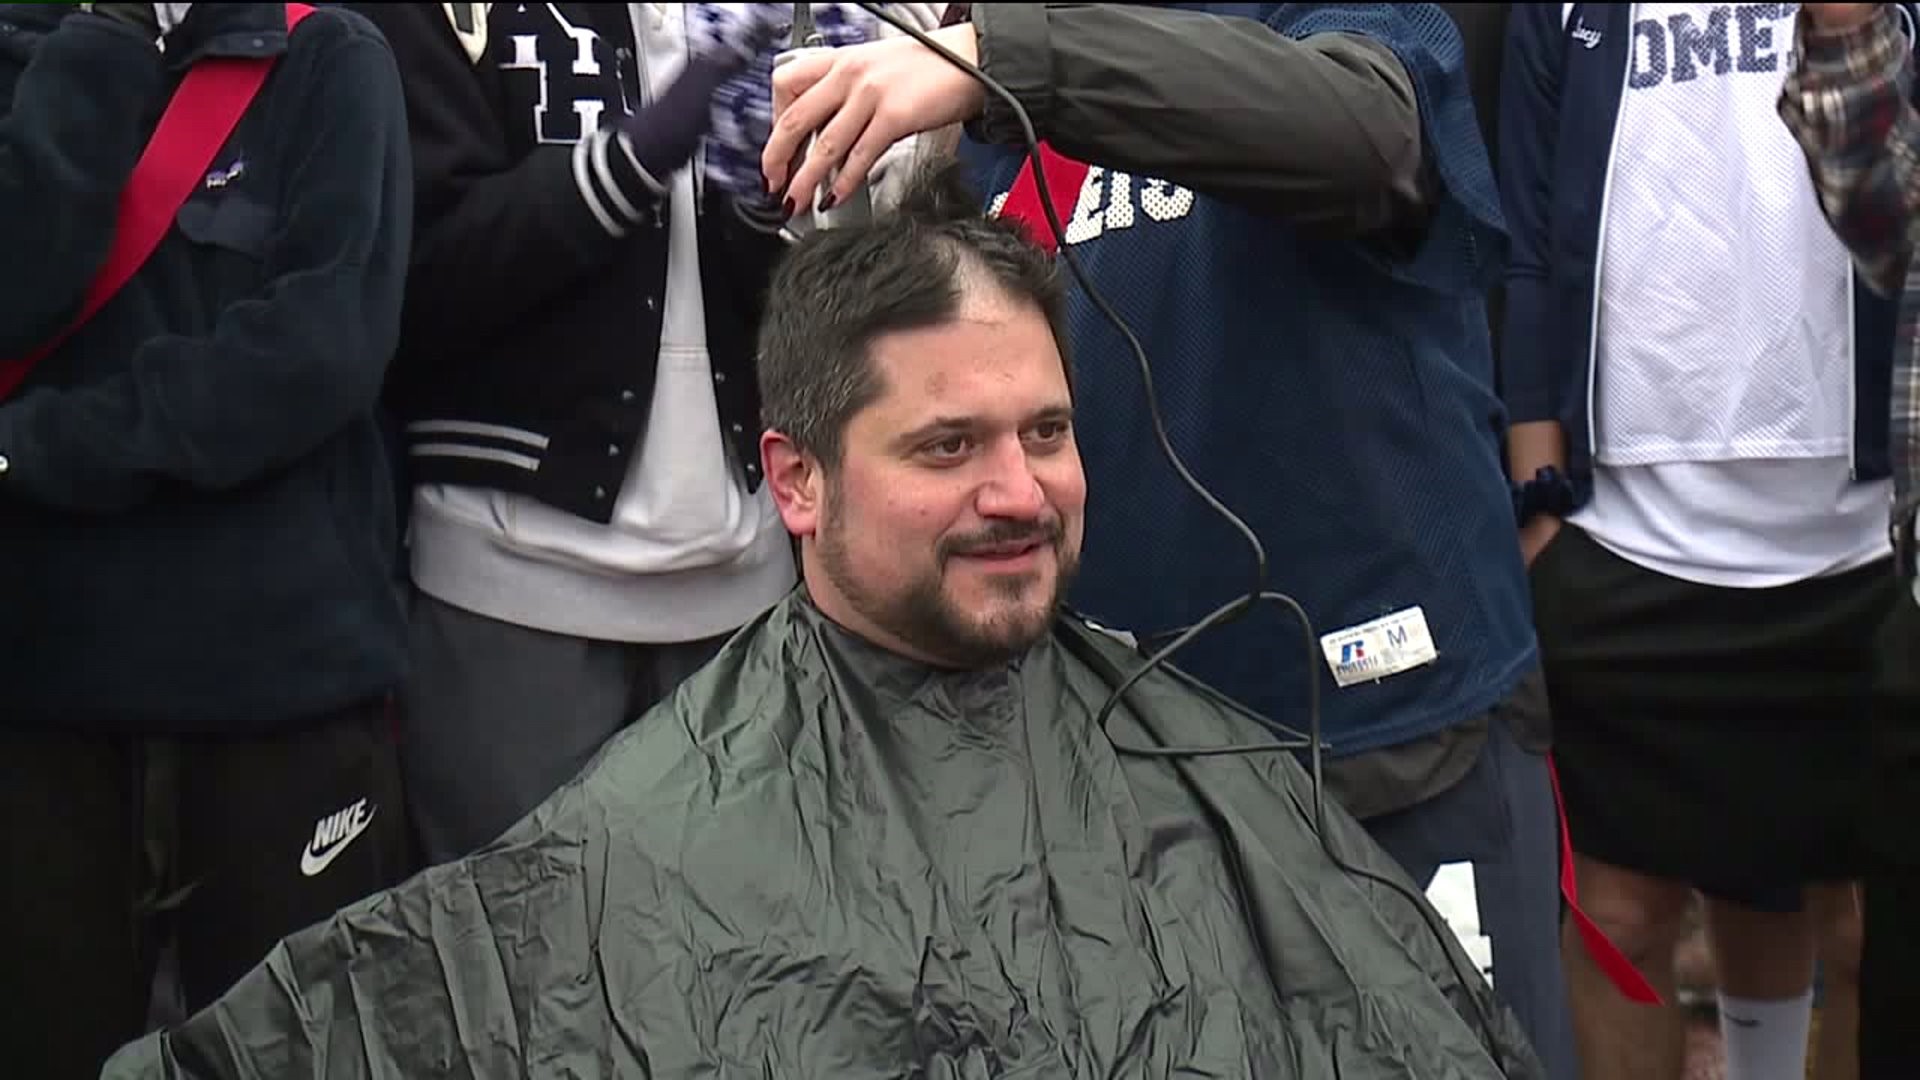 Principal Shaves Head After Students Surpass Charity Goal